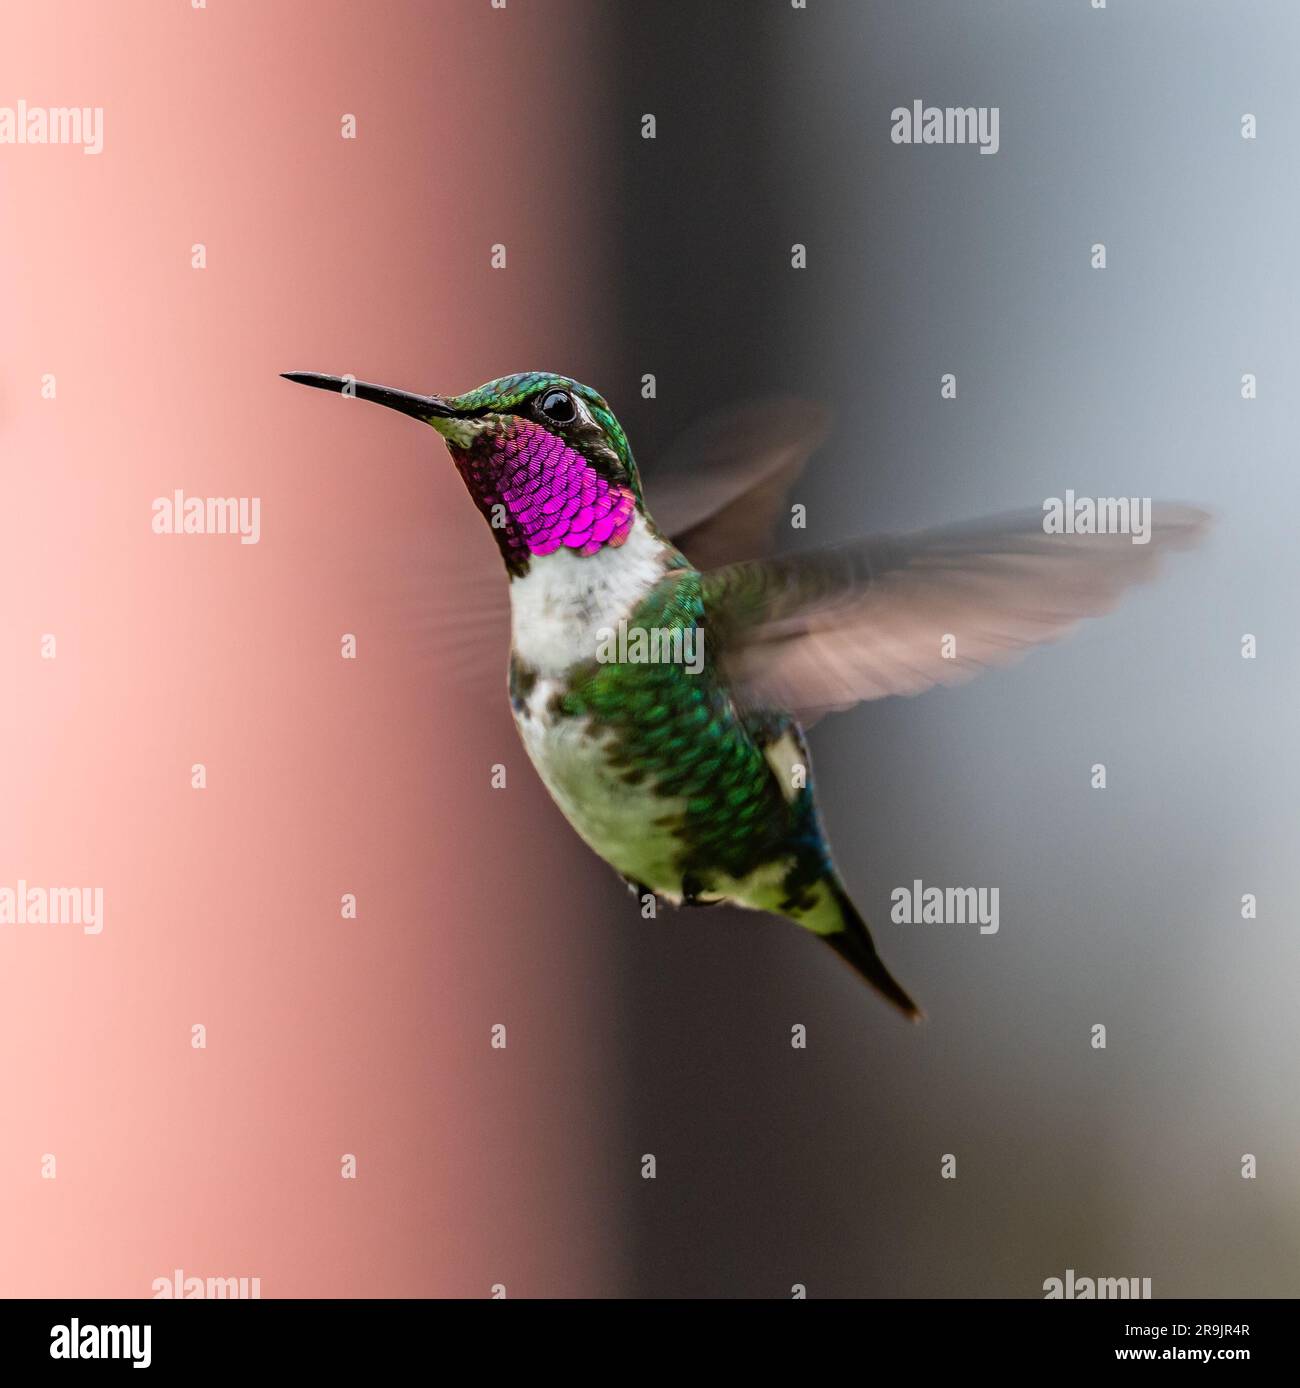 A male White-bellied Woodstar hummingbird (Chaetocercus mulsant) hovering in the air. Colombia, South America. Stock Photo